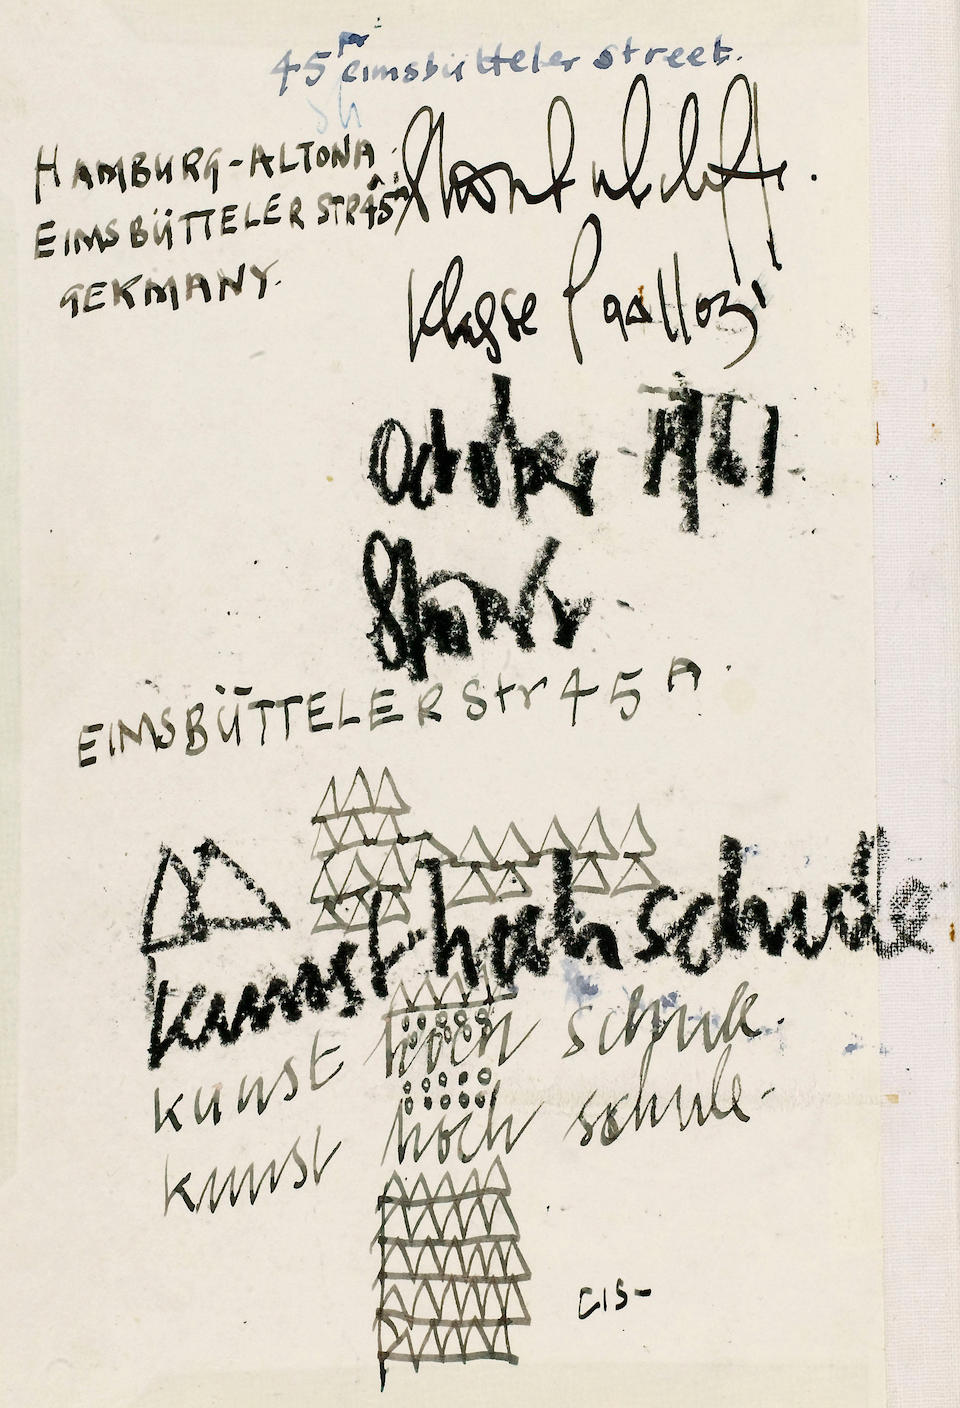 Stuart Sutcliffe's sketch book Hochschule fur Bildende Kunstler, Hamburg, dated October 1961 Eduardo Paolozzi described Stuart in John Willett's 1967 book 'Art In The City' - "He was a very perceptive and sensitive person and restless. There is that sort of marvellously desperate thing about the whole Liverpool business now. I always felt there was a desperate thing about Stuart in his life...I was afraid of it. He had so much energy and was so inventive. The feeling of potential splashed out from him. He had the rich kind of sensibility and arrogance to succeed"